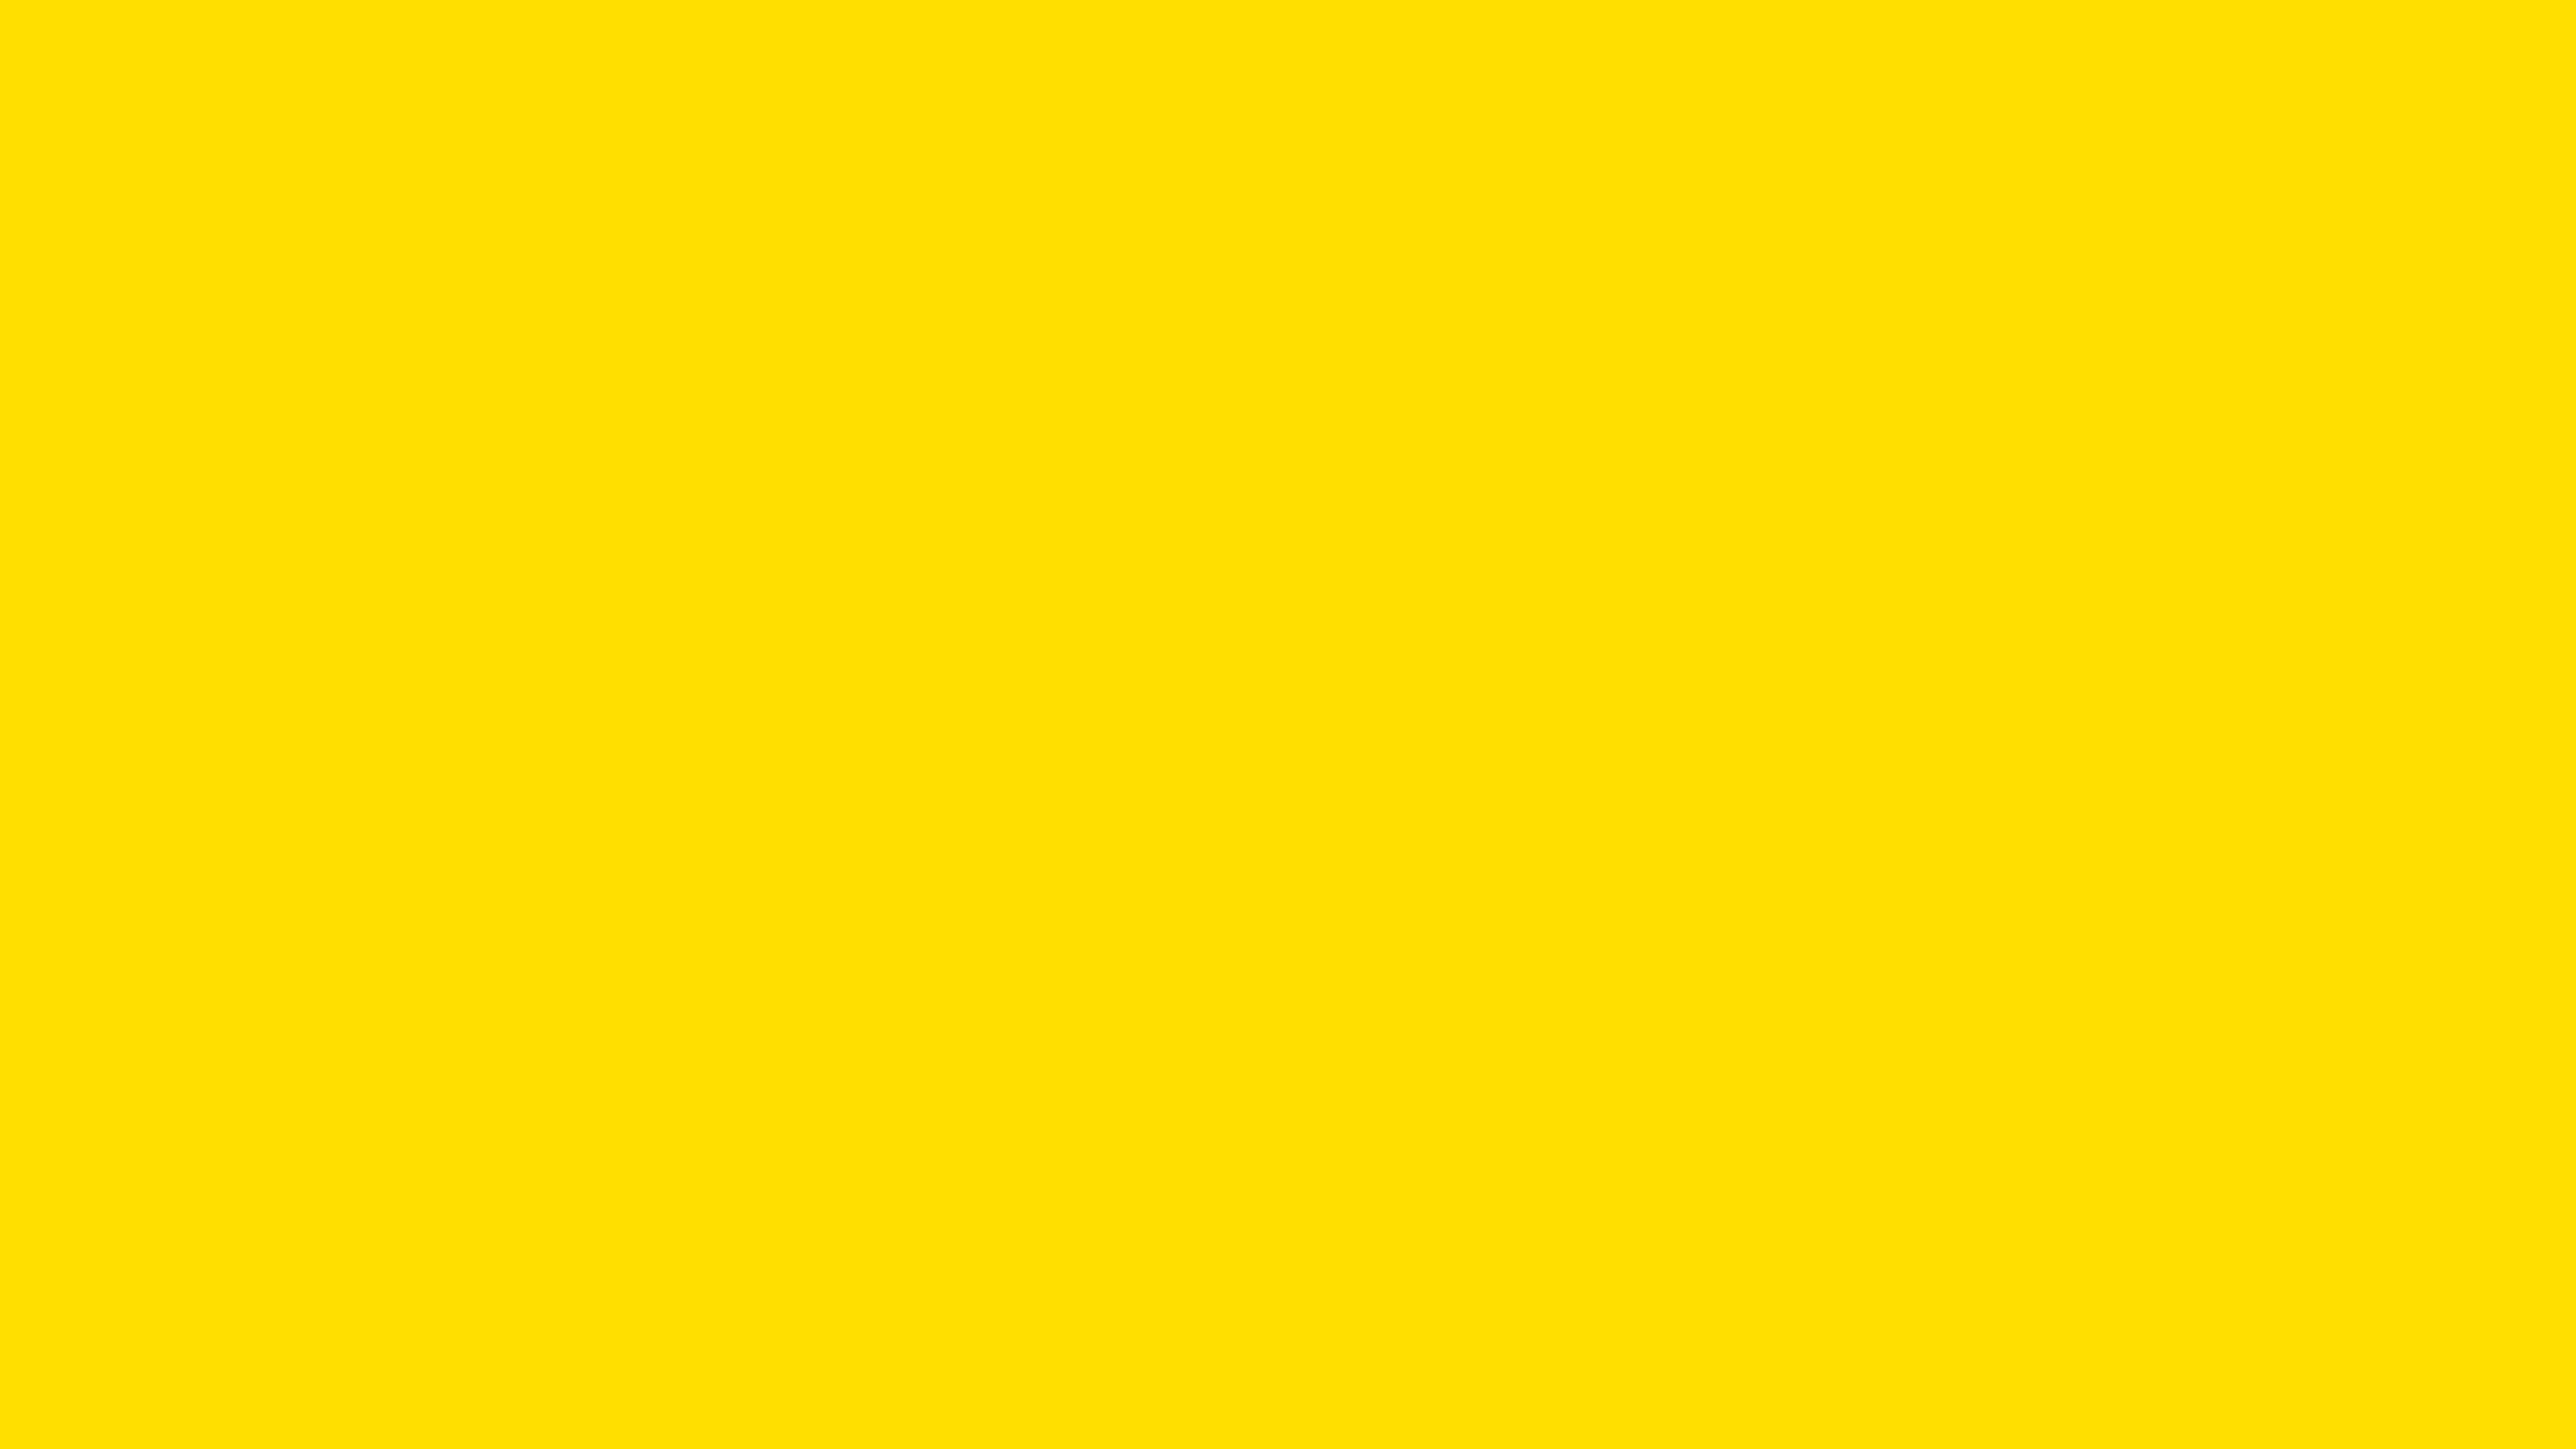 3840x2160 Golden Yellow Solid Color Background